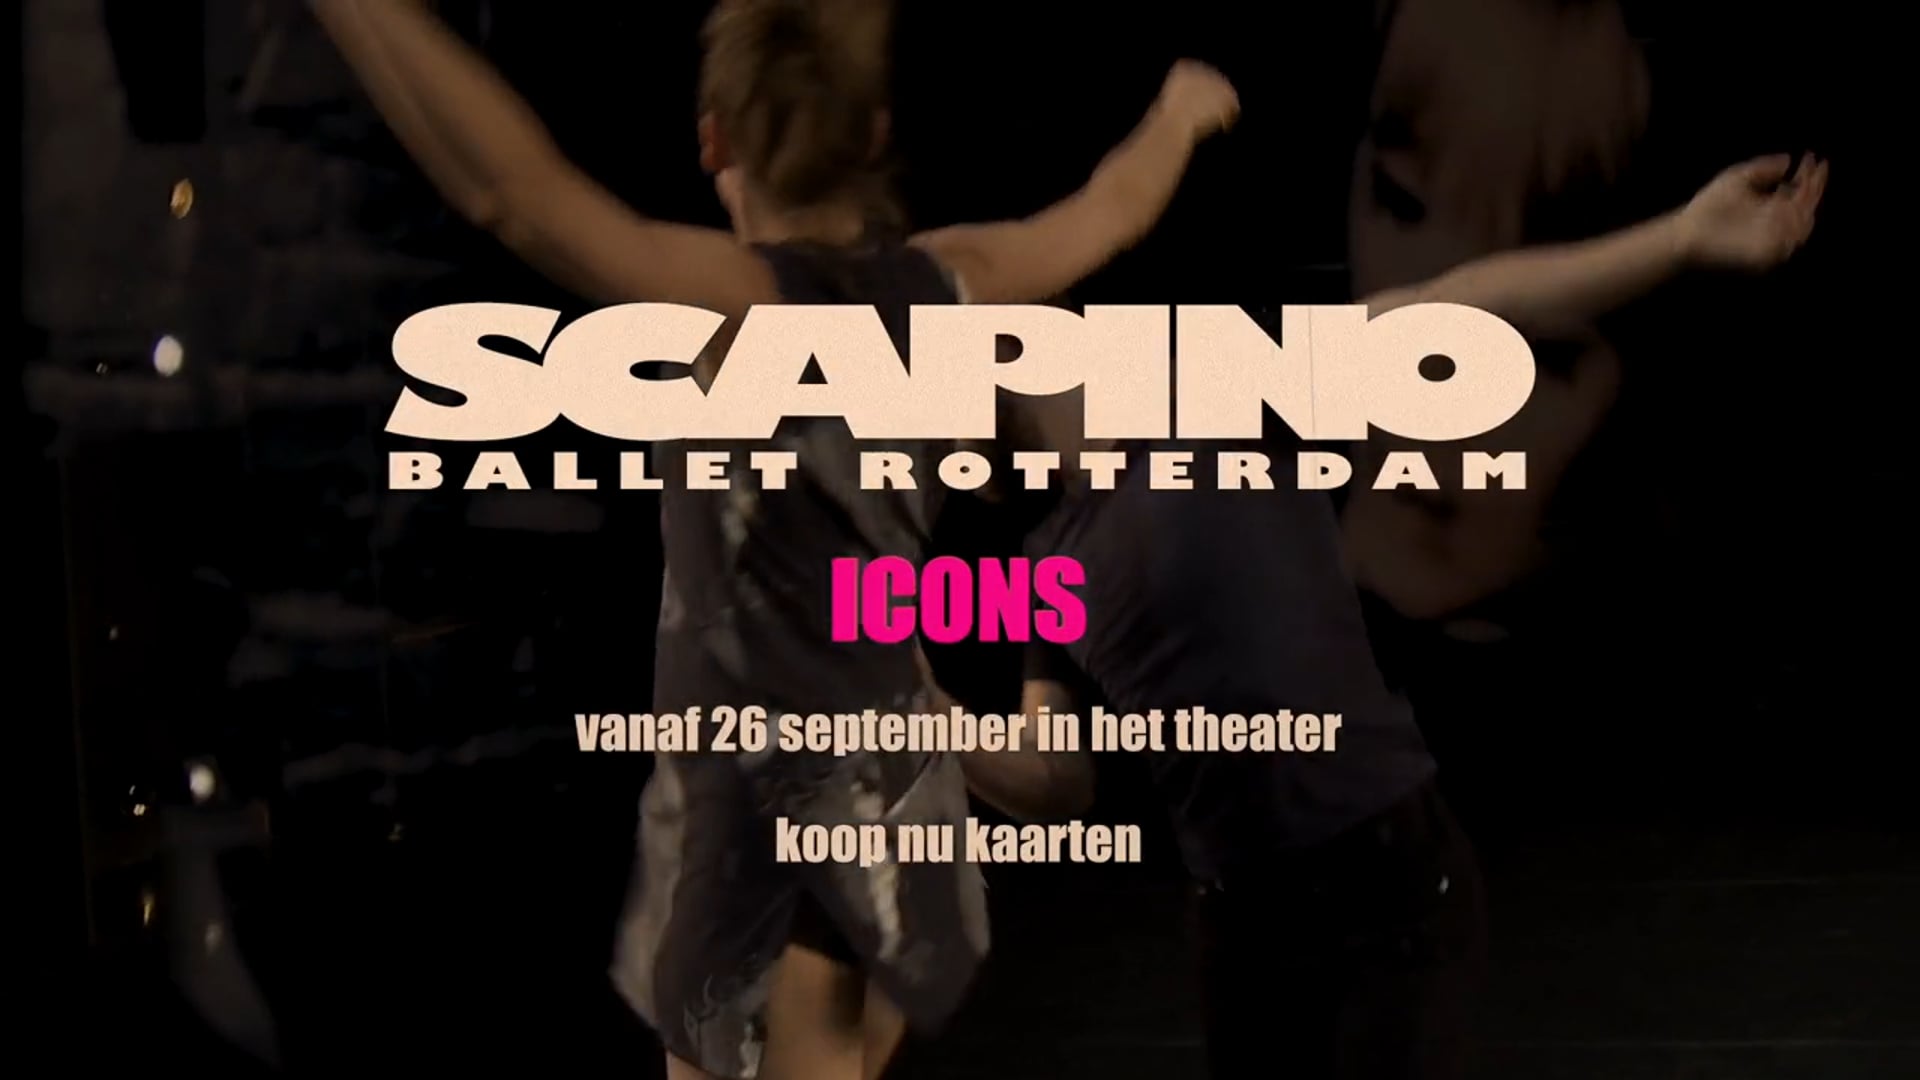 TV Commercial for STER Channel. Program ICONS by Scapino Ballet Rotterdam 2014.